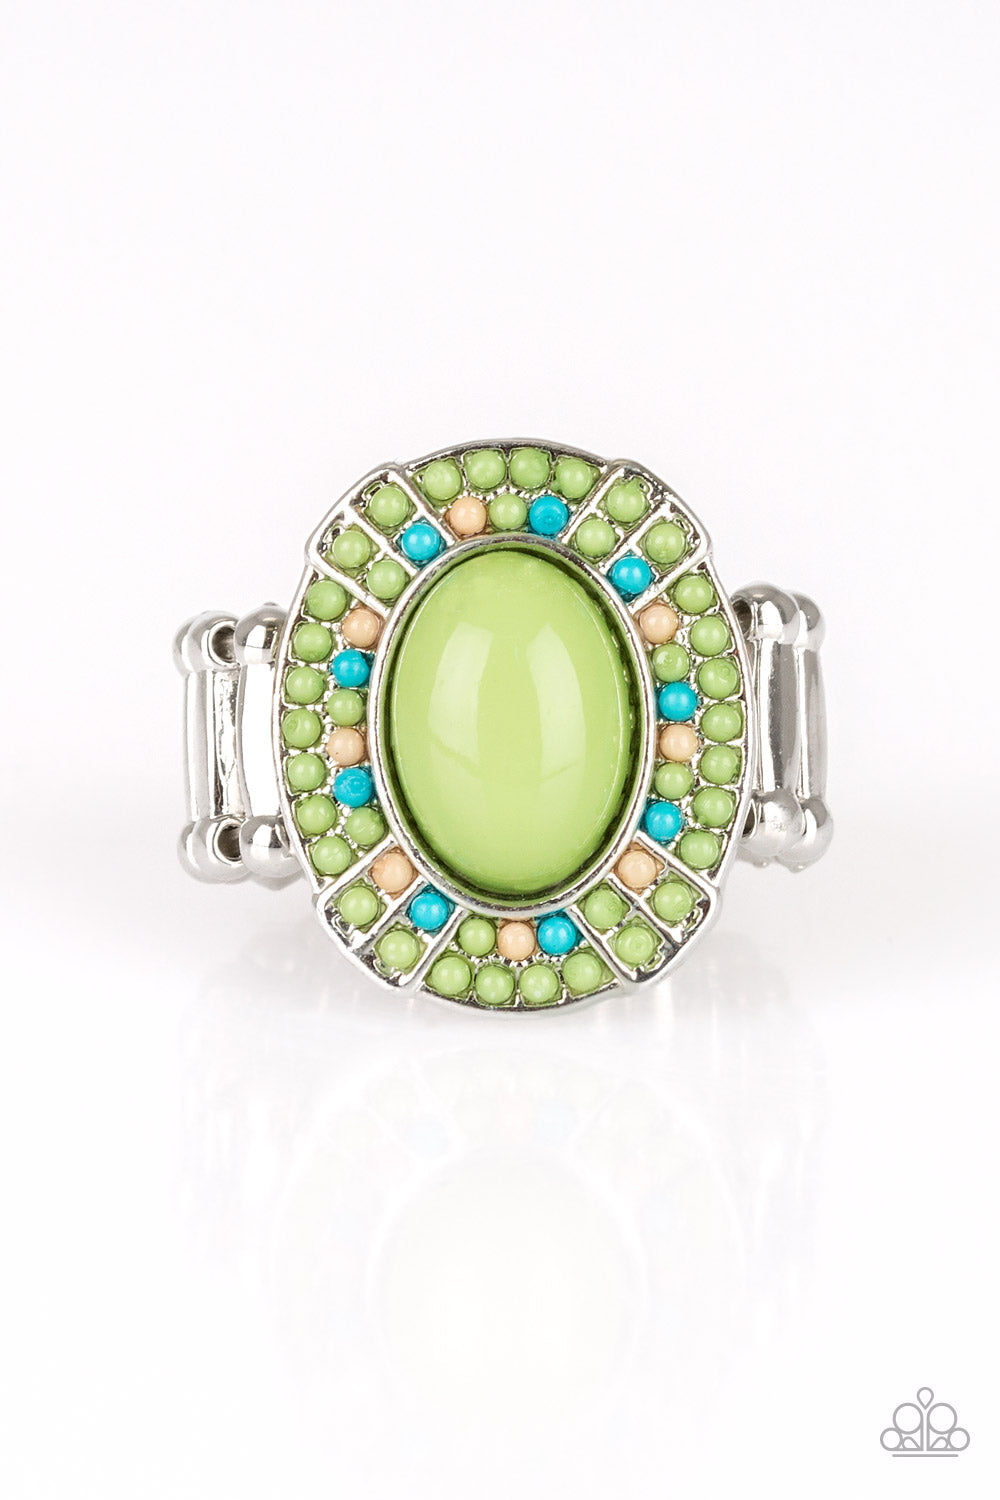 Colorfully Rustic - Green ring